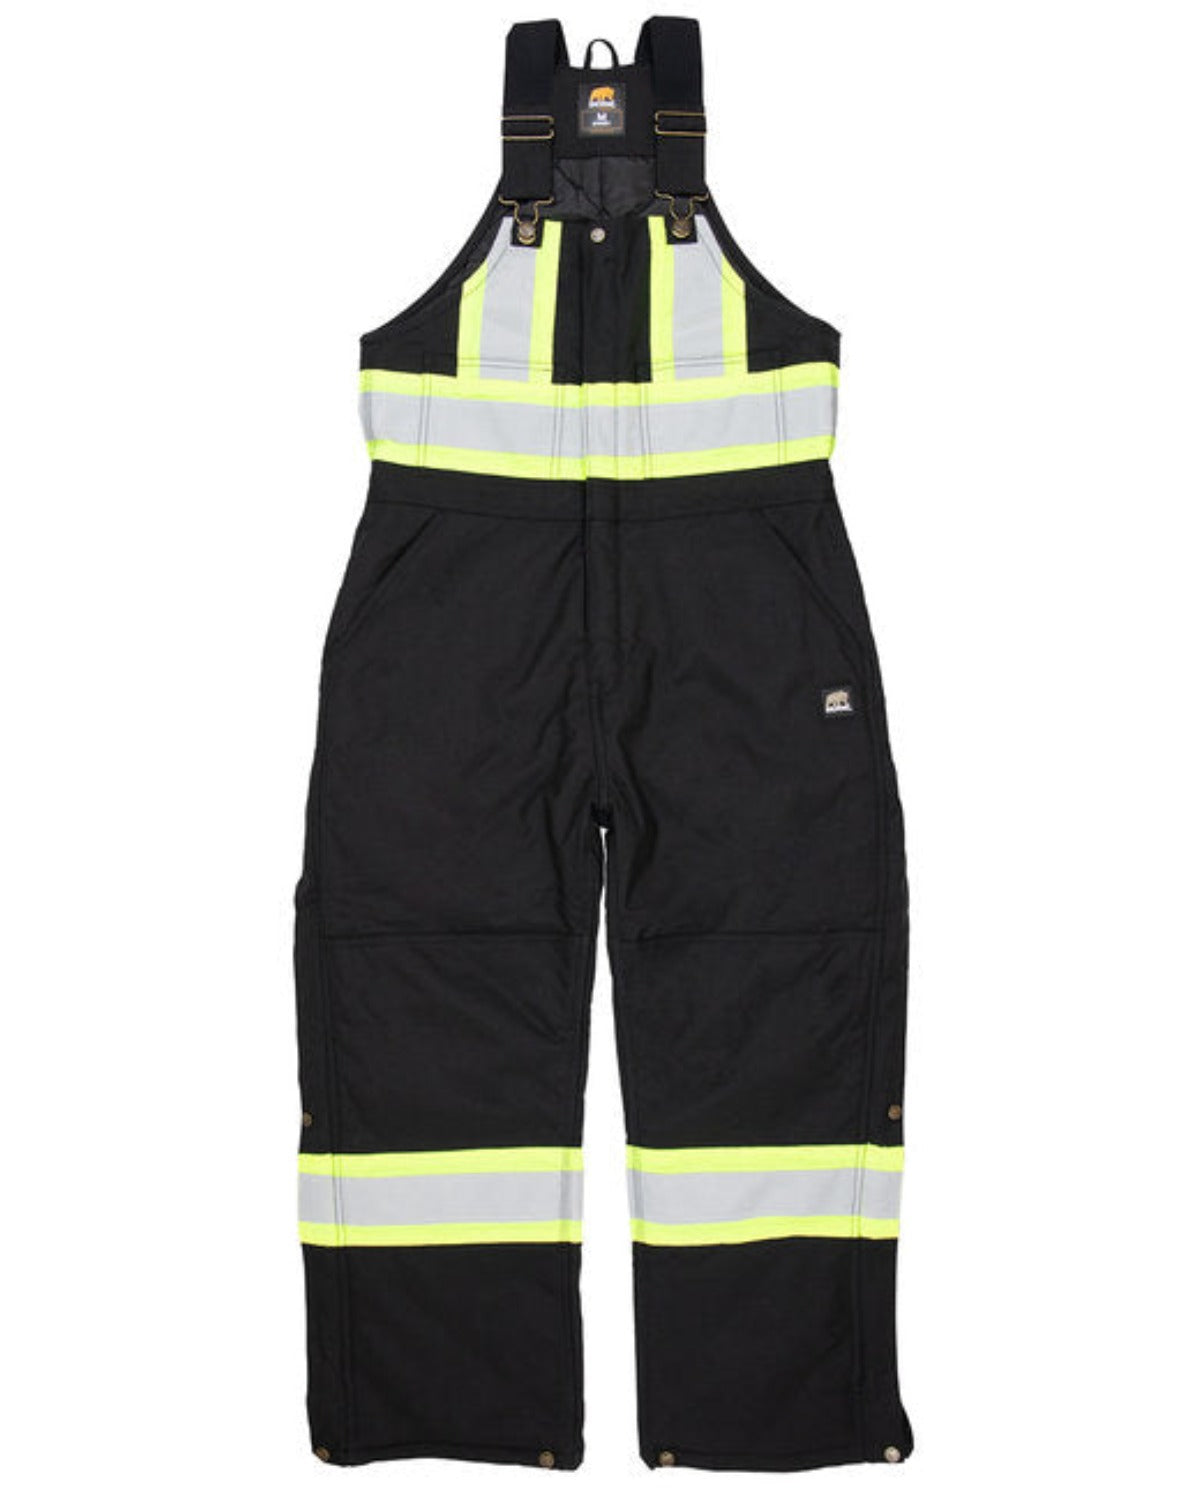 BERNE MEN'S SAFETY STRIPED ARCTIC INSULATED BIB OVERALL